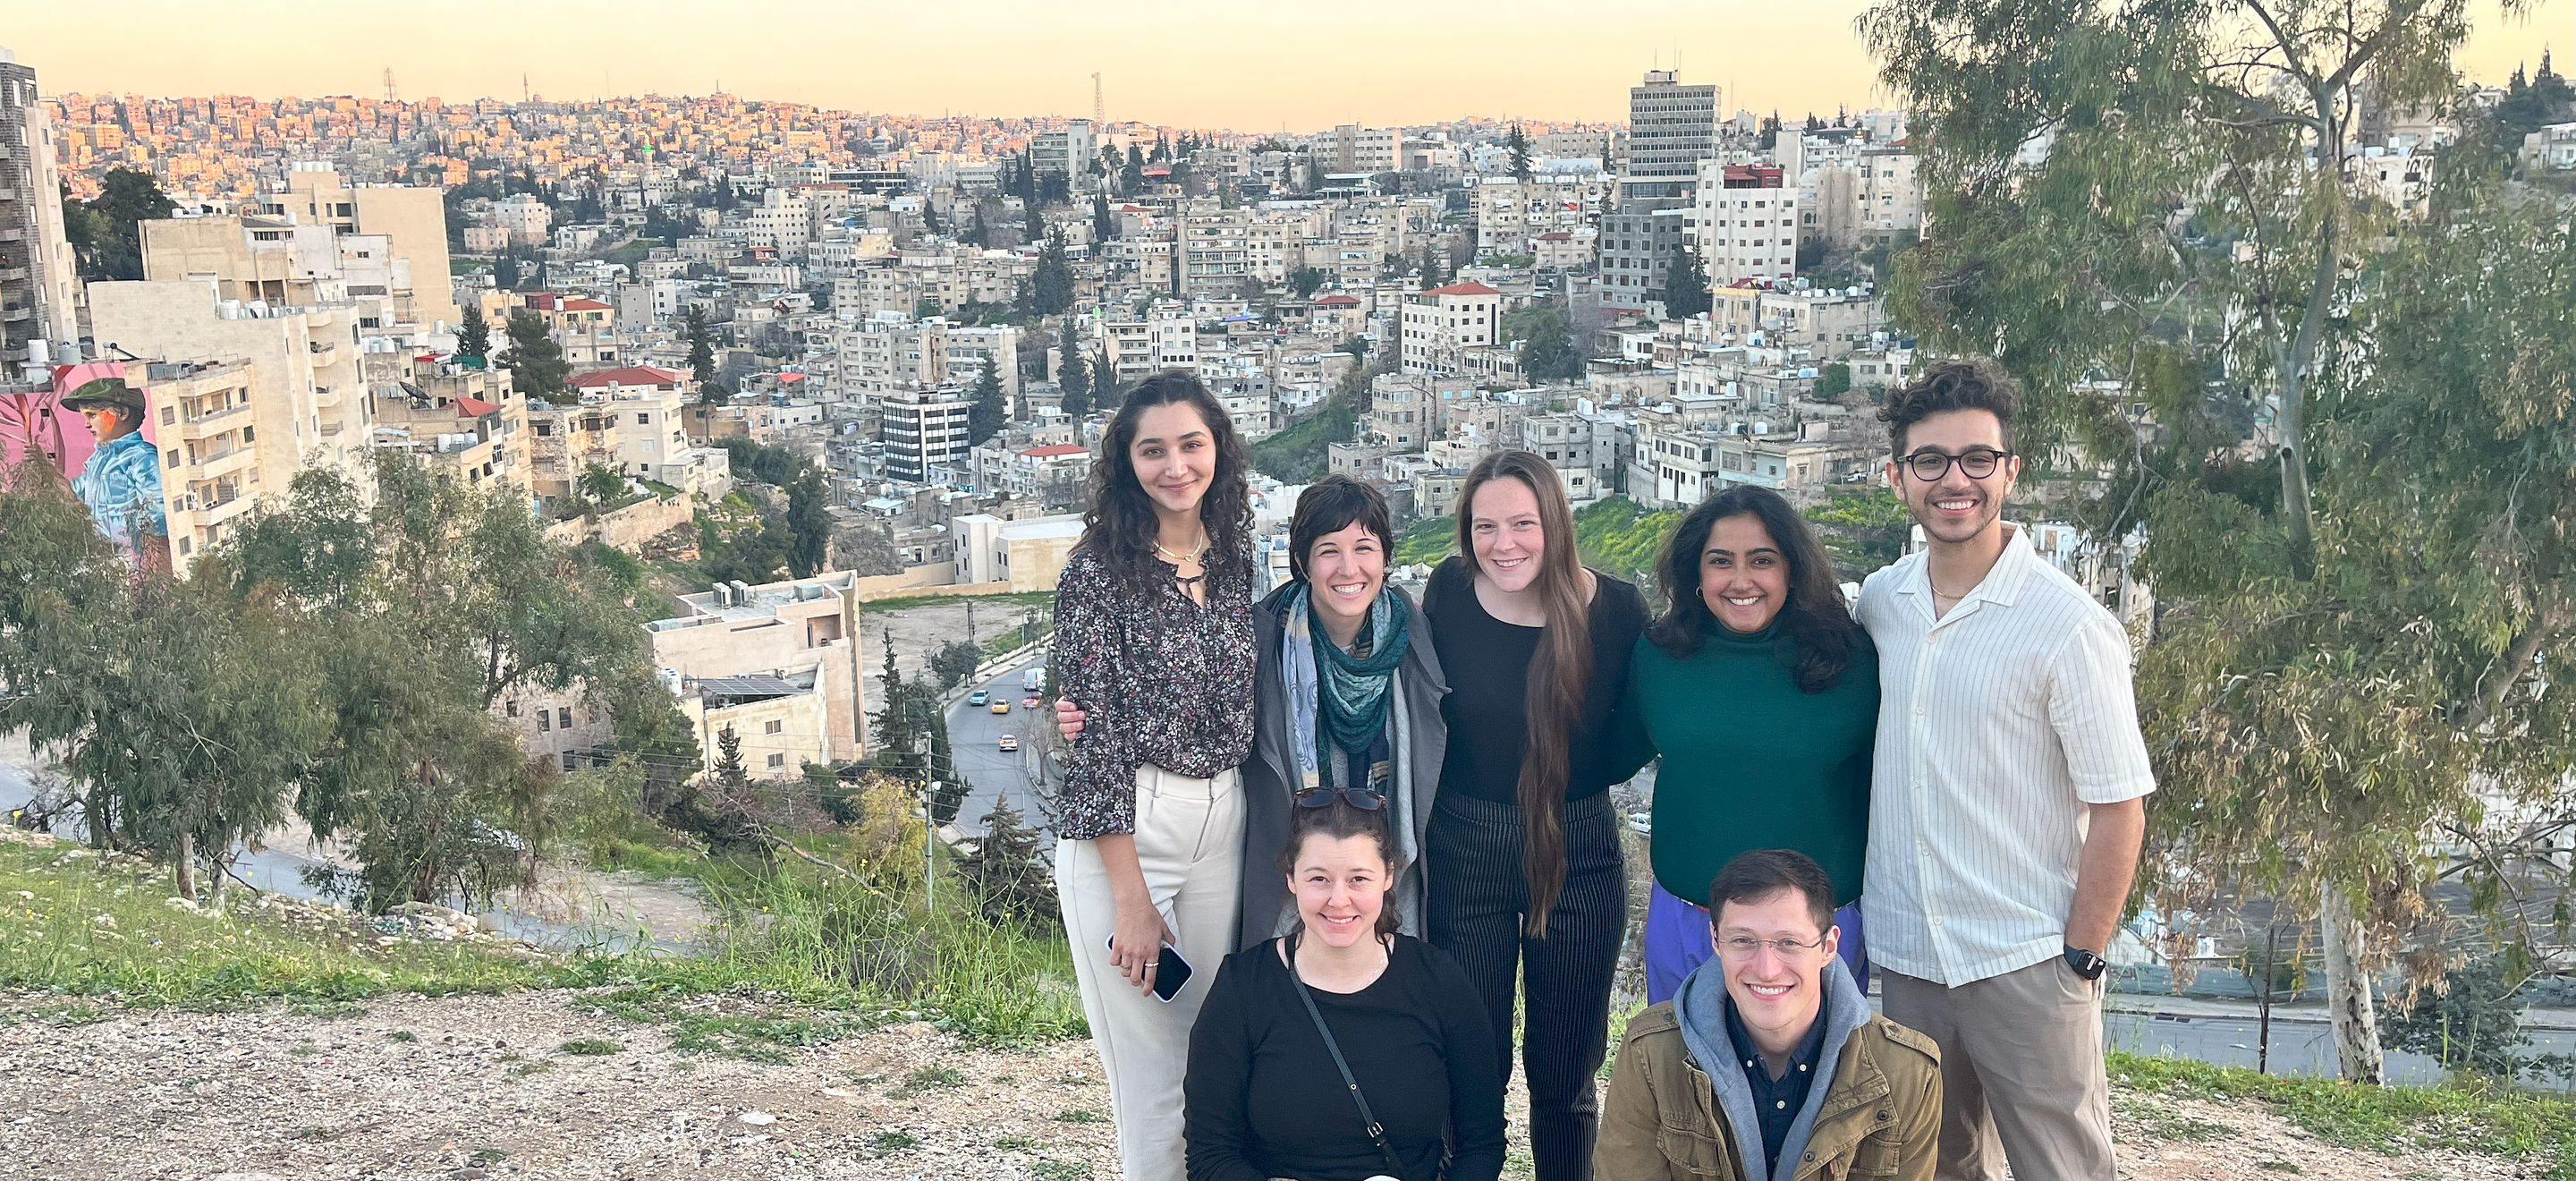 A group of students from IRAP's law school chapters stand against the Amman, Jordan cityscape.